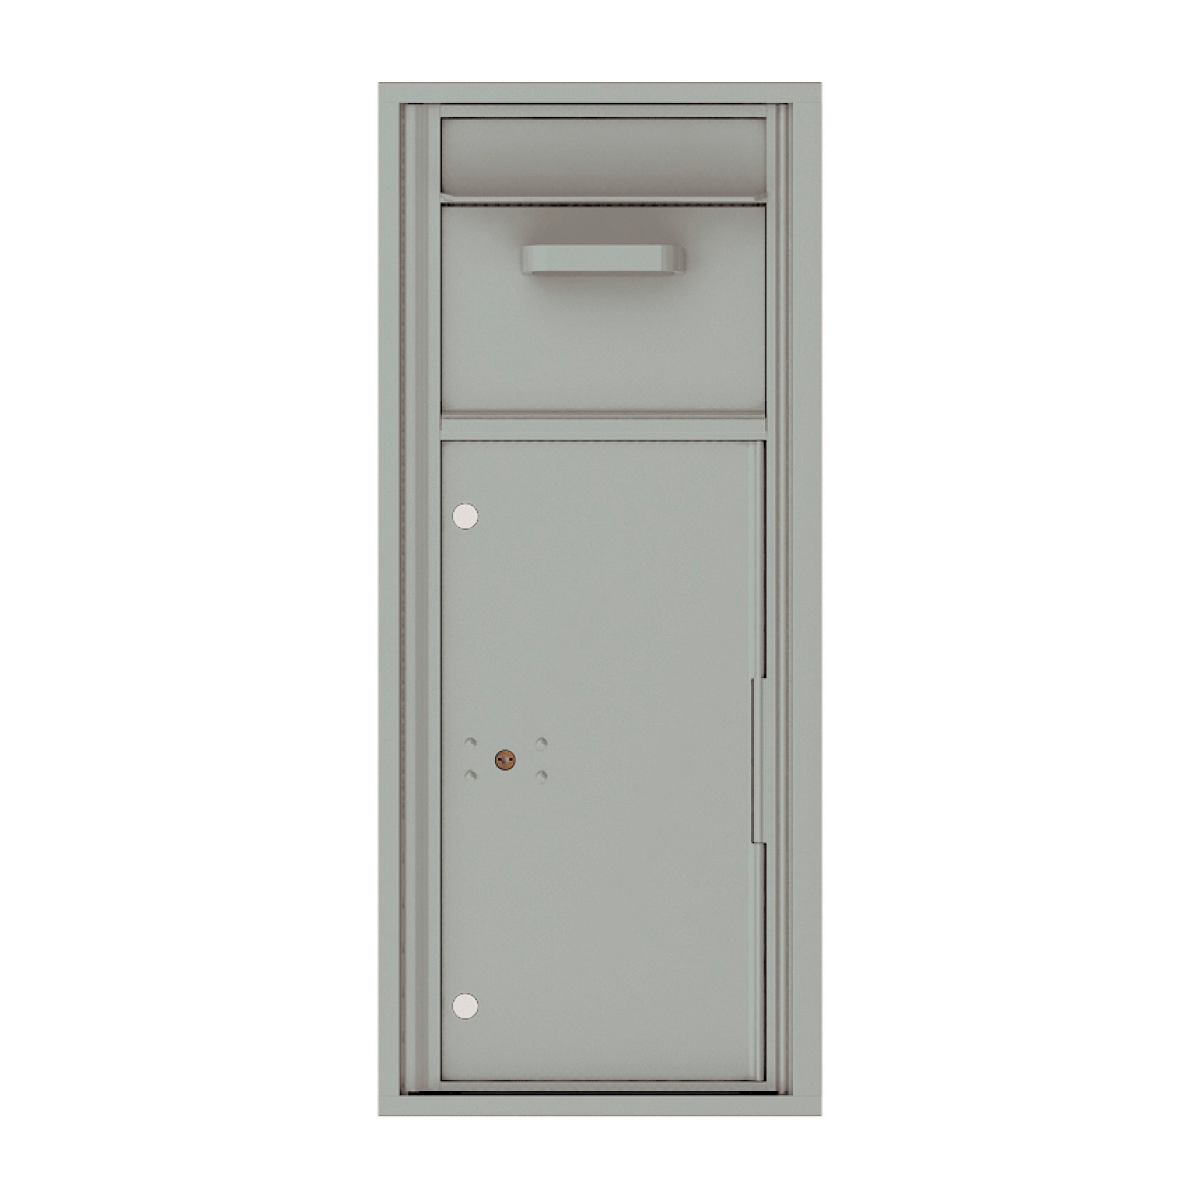 4C Mailboxes 4C11S-HOP Collection and Drop Box Product Image